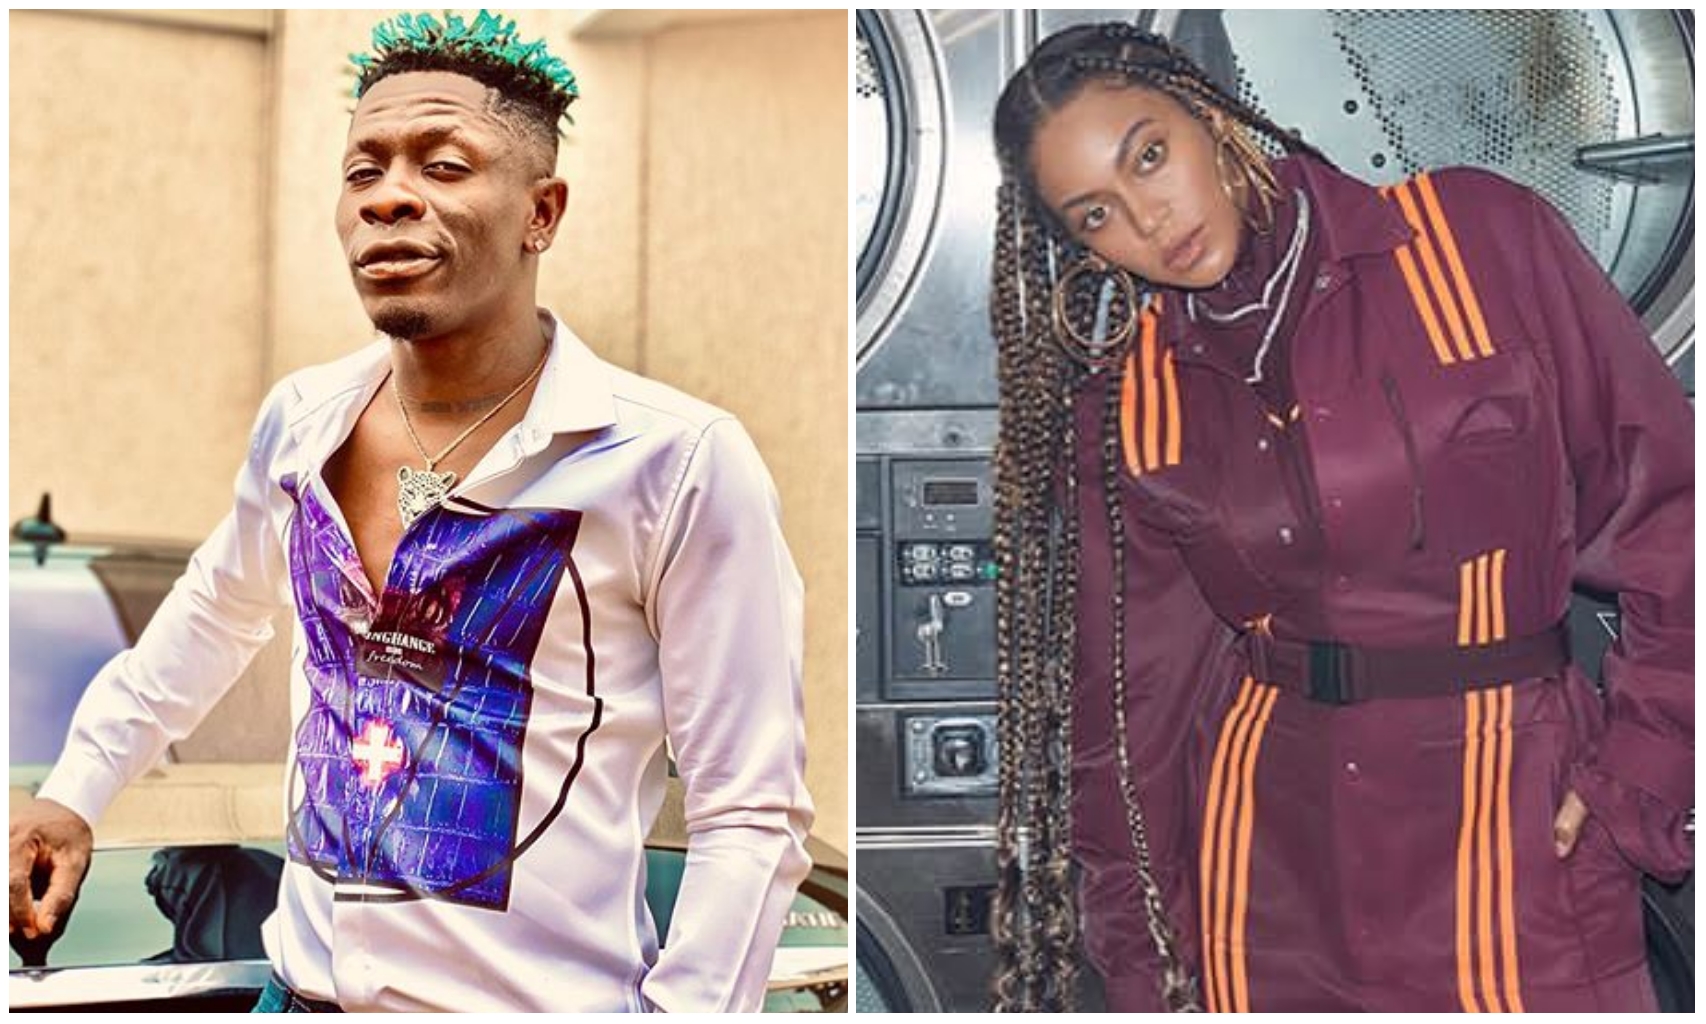 Shatta Wale appreciates Beyonce for featuring him on her new single 'Already' (Photo)